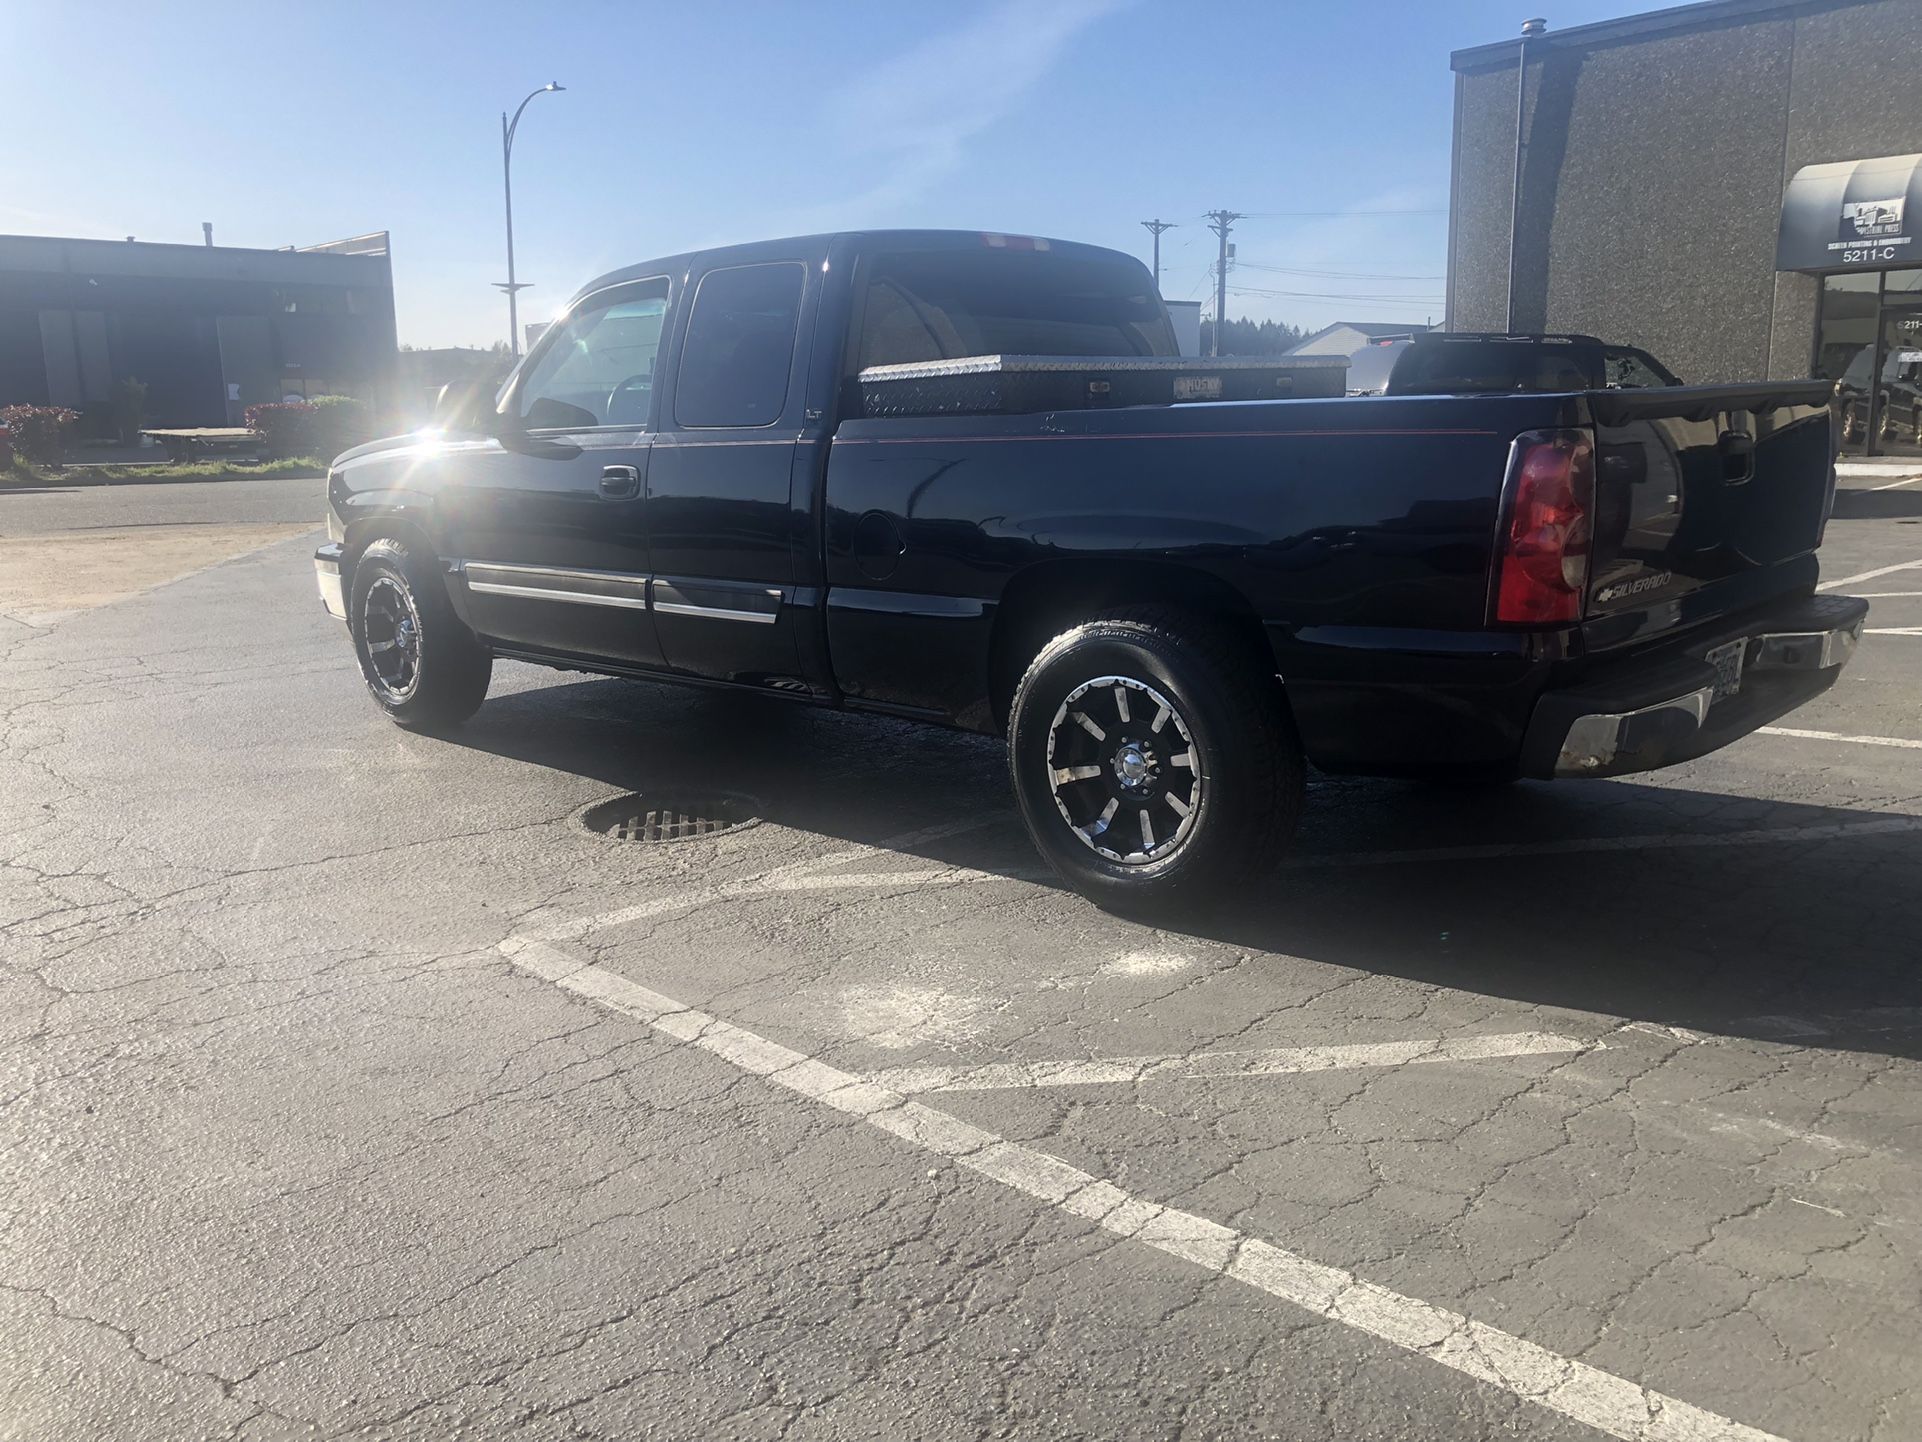 06 Chevy extended cab short box Was